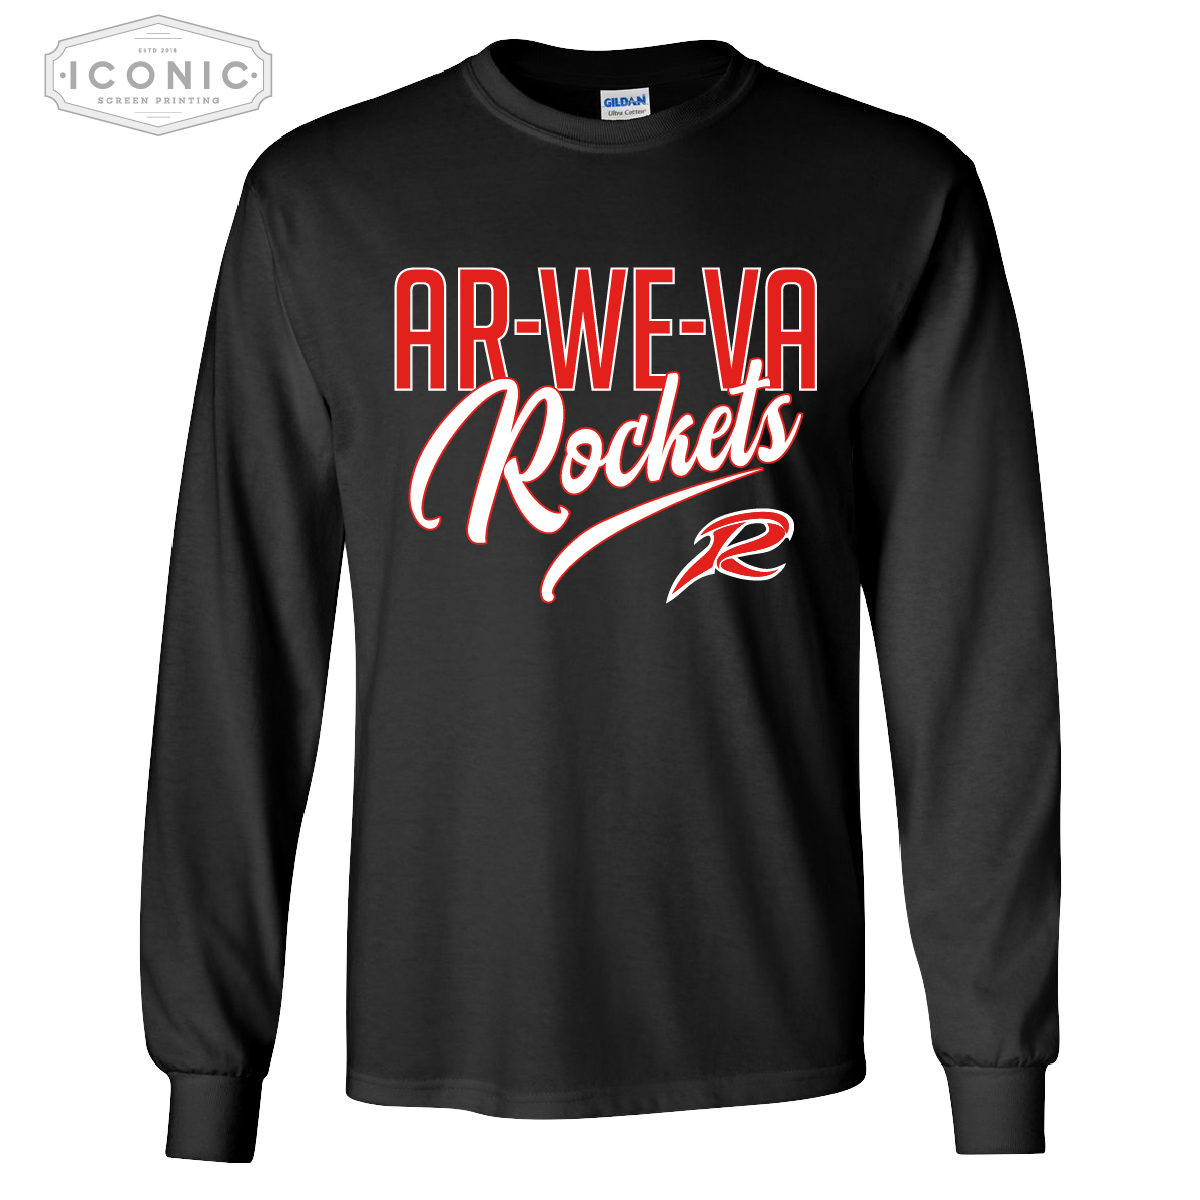 AWV Rockets - Ultra Cotton Long Sleeve - Clearance